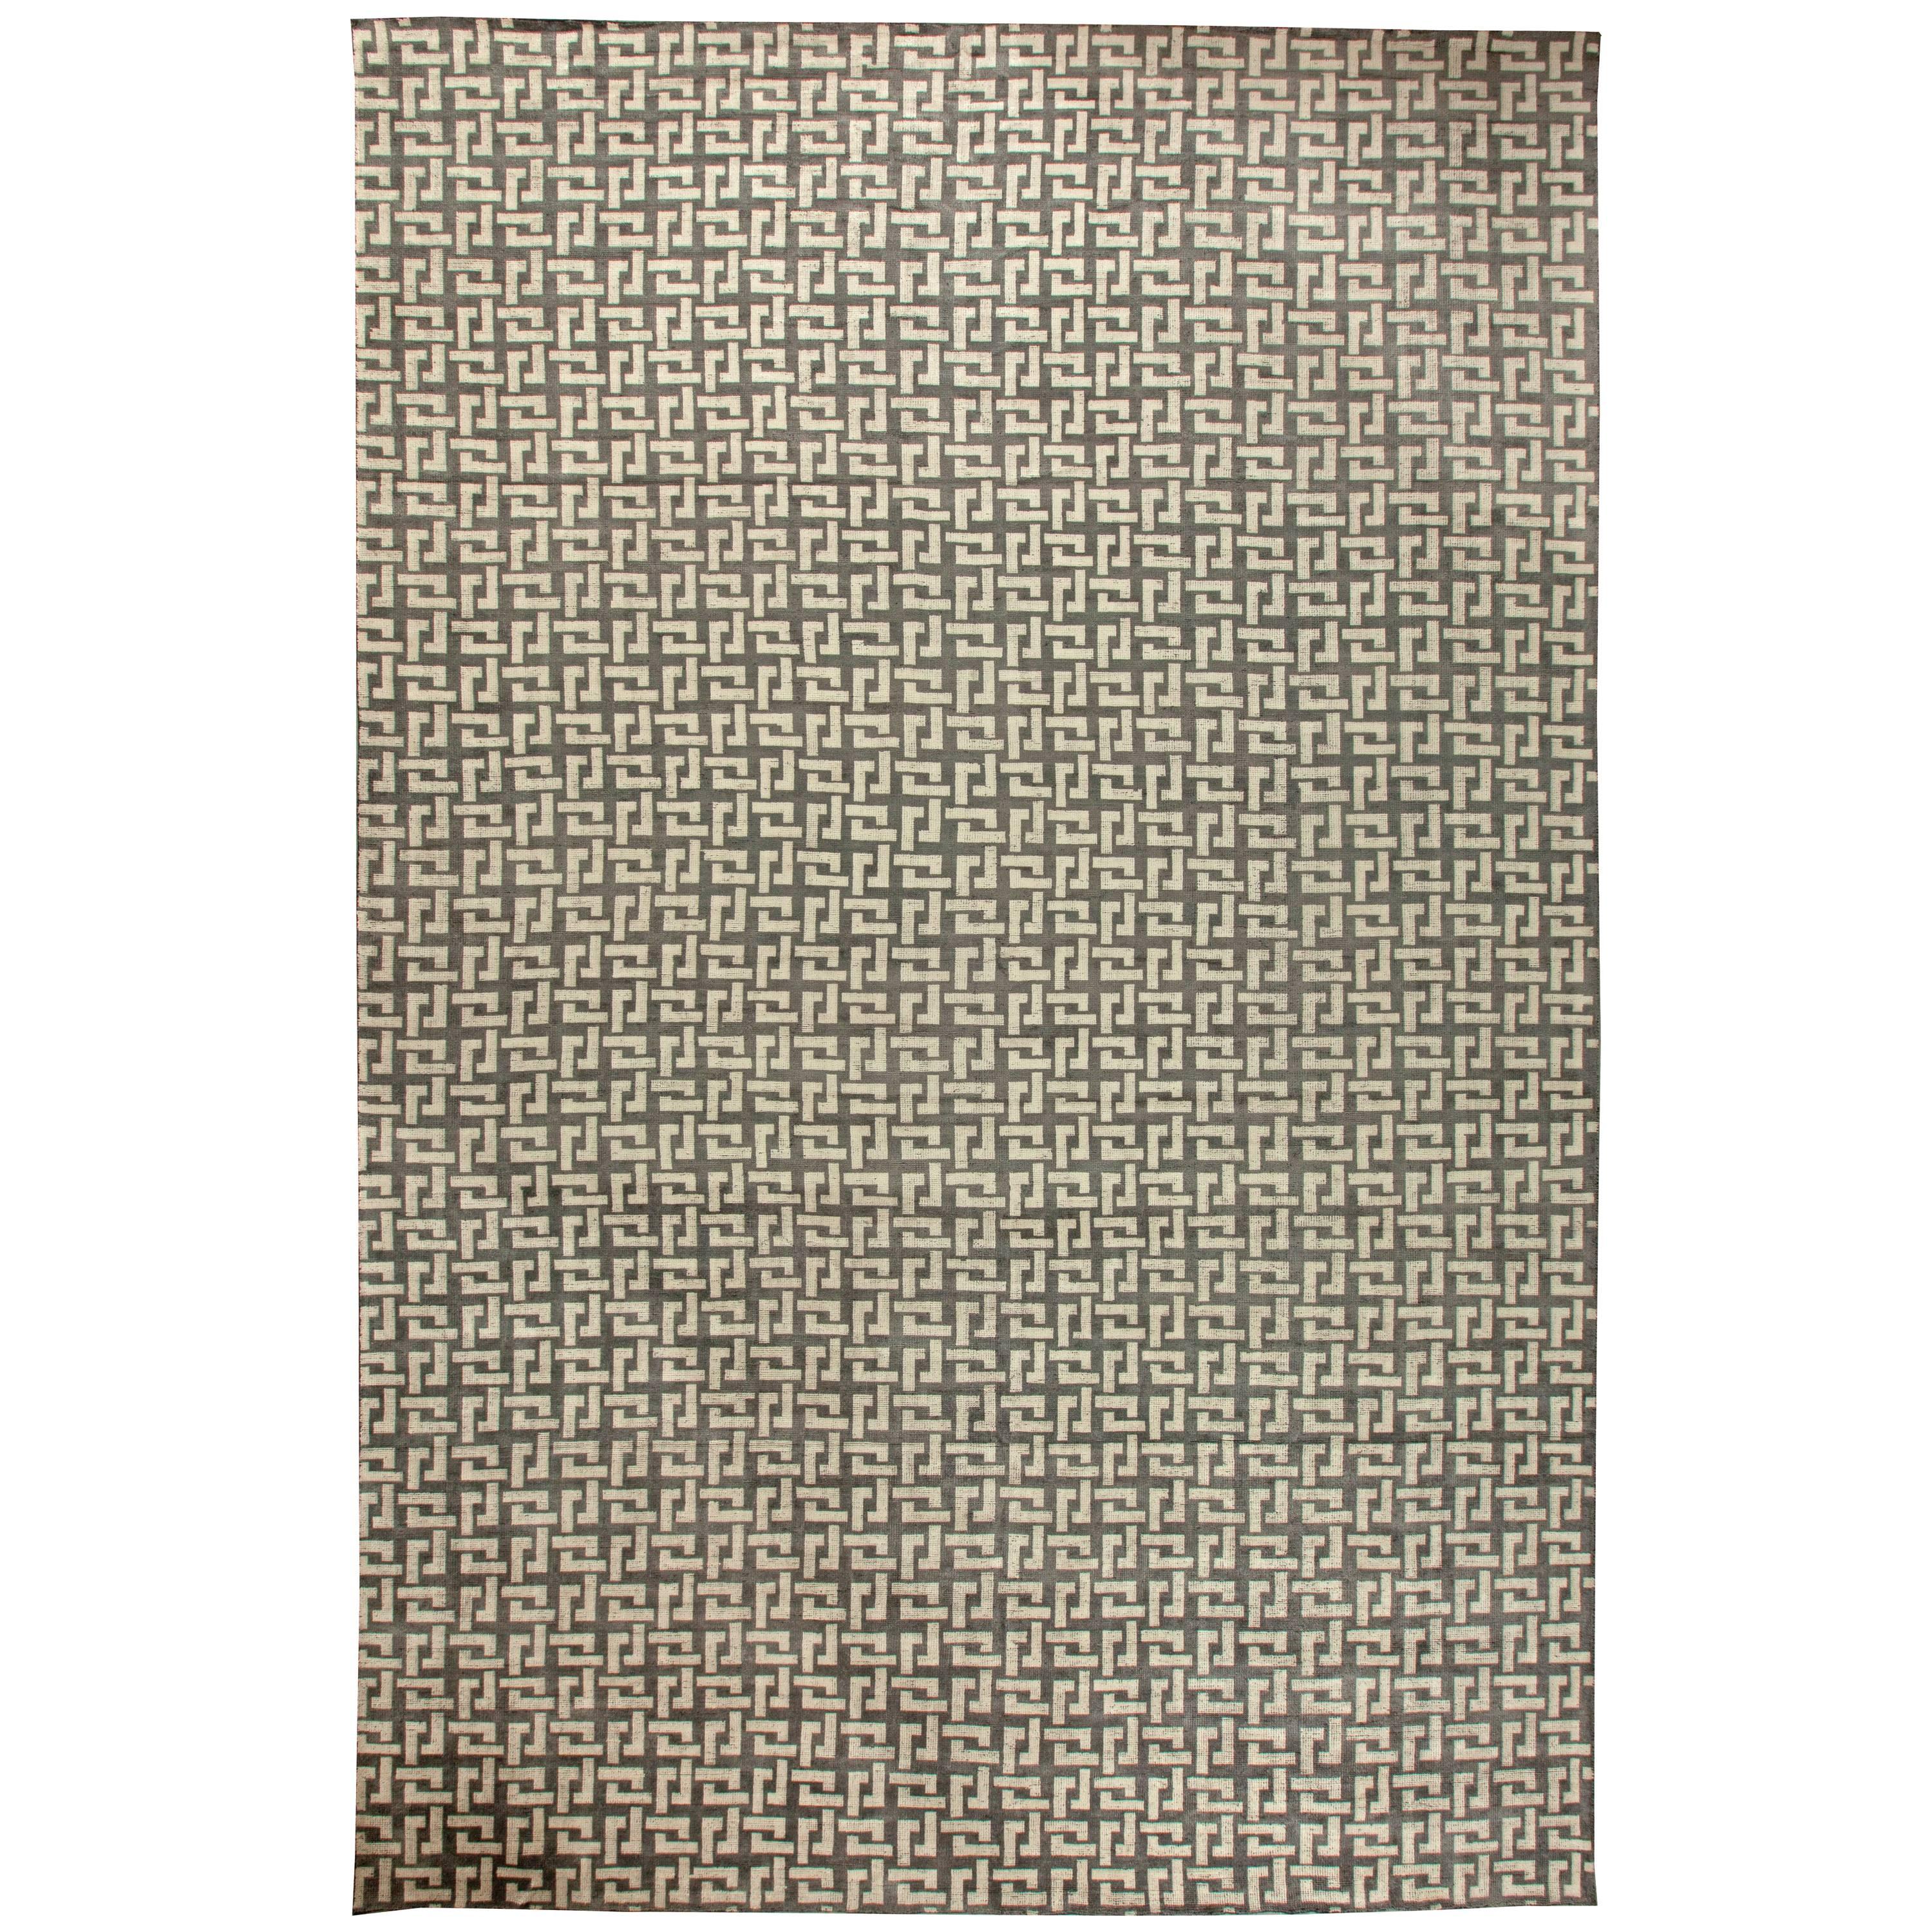 Contemporary Black and White Large Modular Geometric Rug by Doris Leslie Blau For Sale